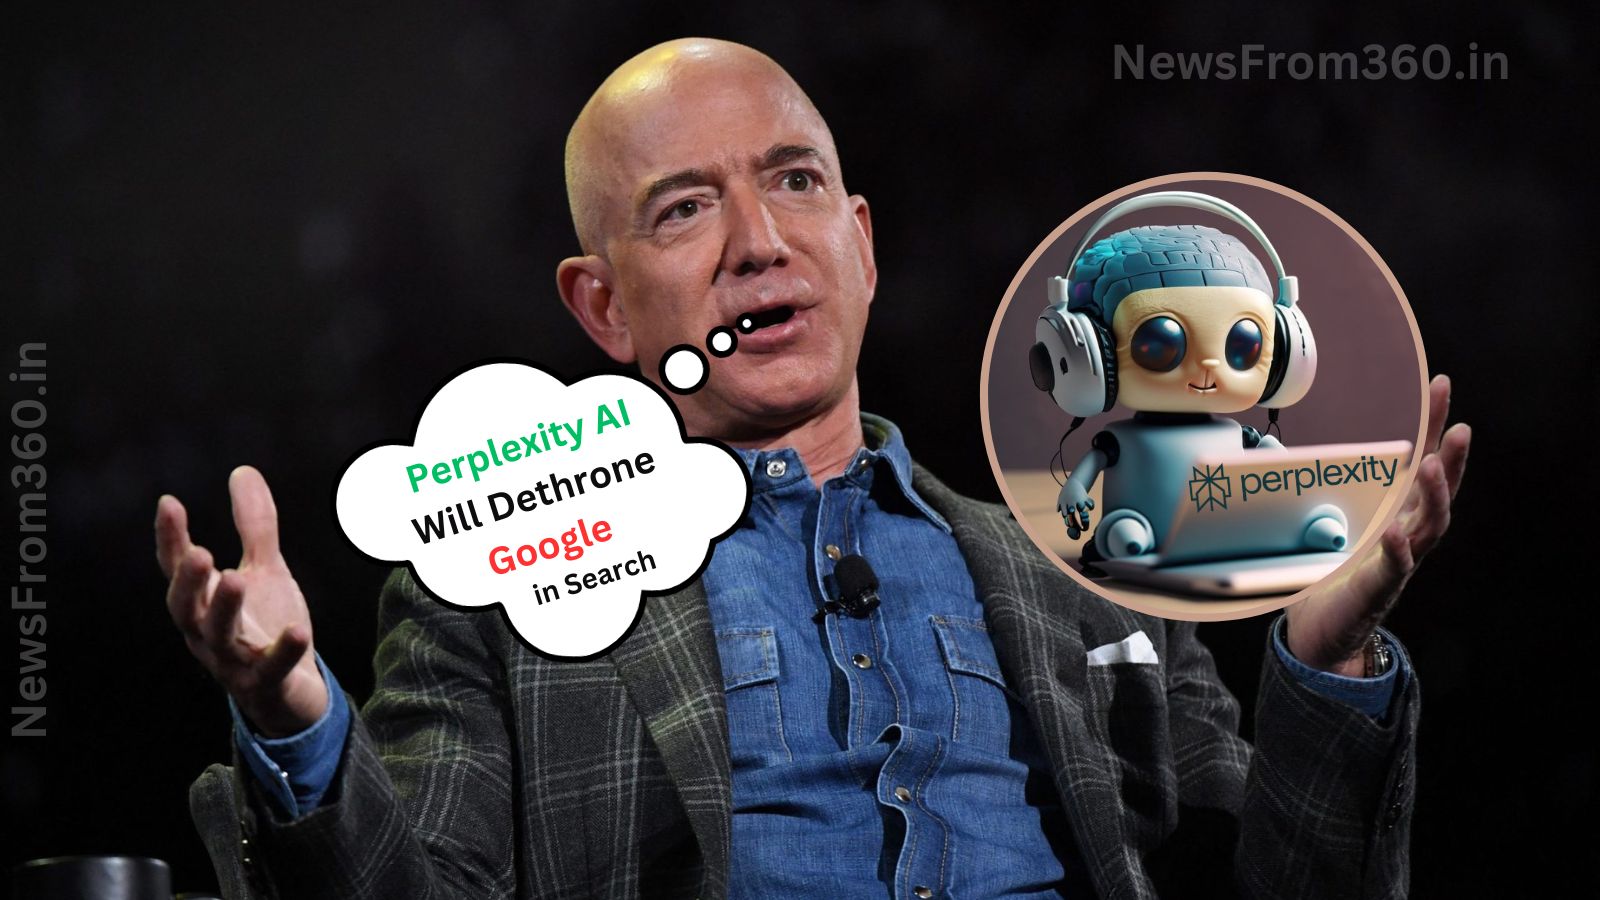 Jeff Bezos and Nvidia Invested $73.6 Million in Perplexity AI, Will Dethrone Google in Search